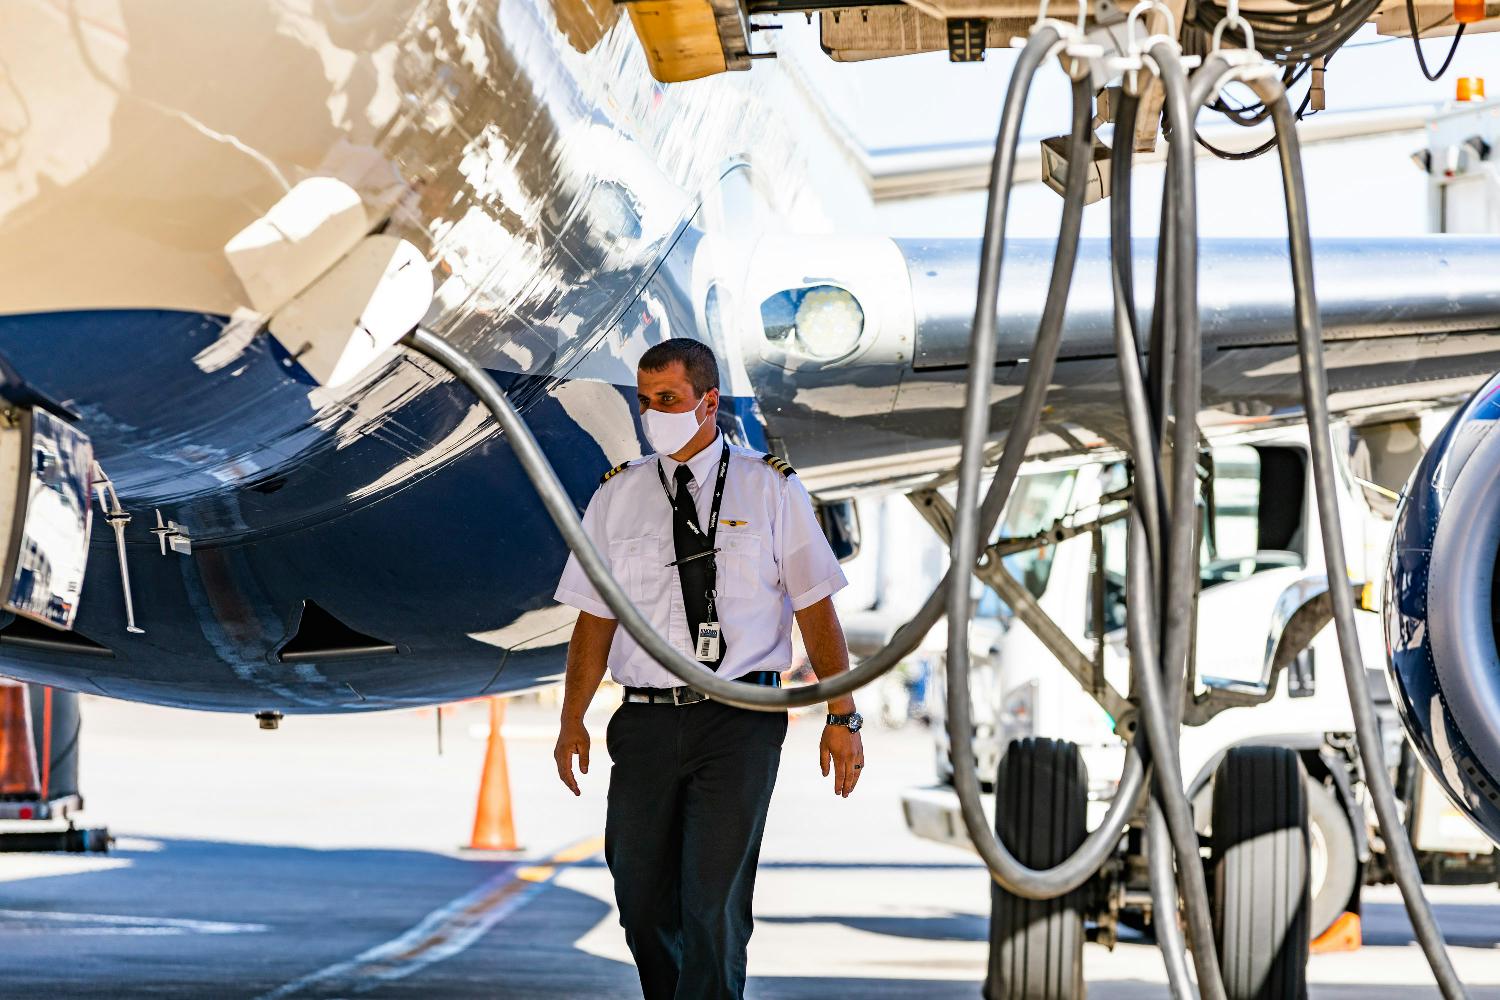 SkyWest remains focused on working to ensure we’re in the best possible position to help lead the recovery.  